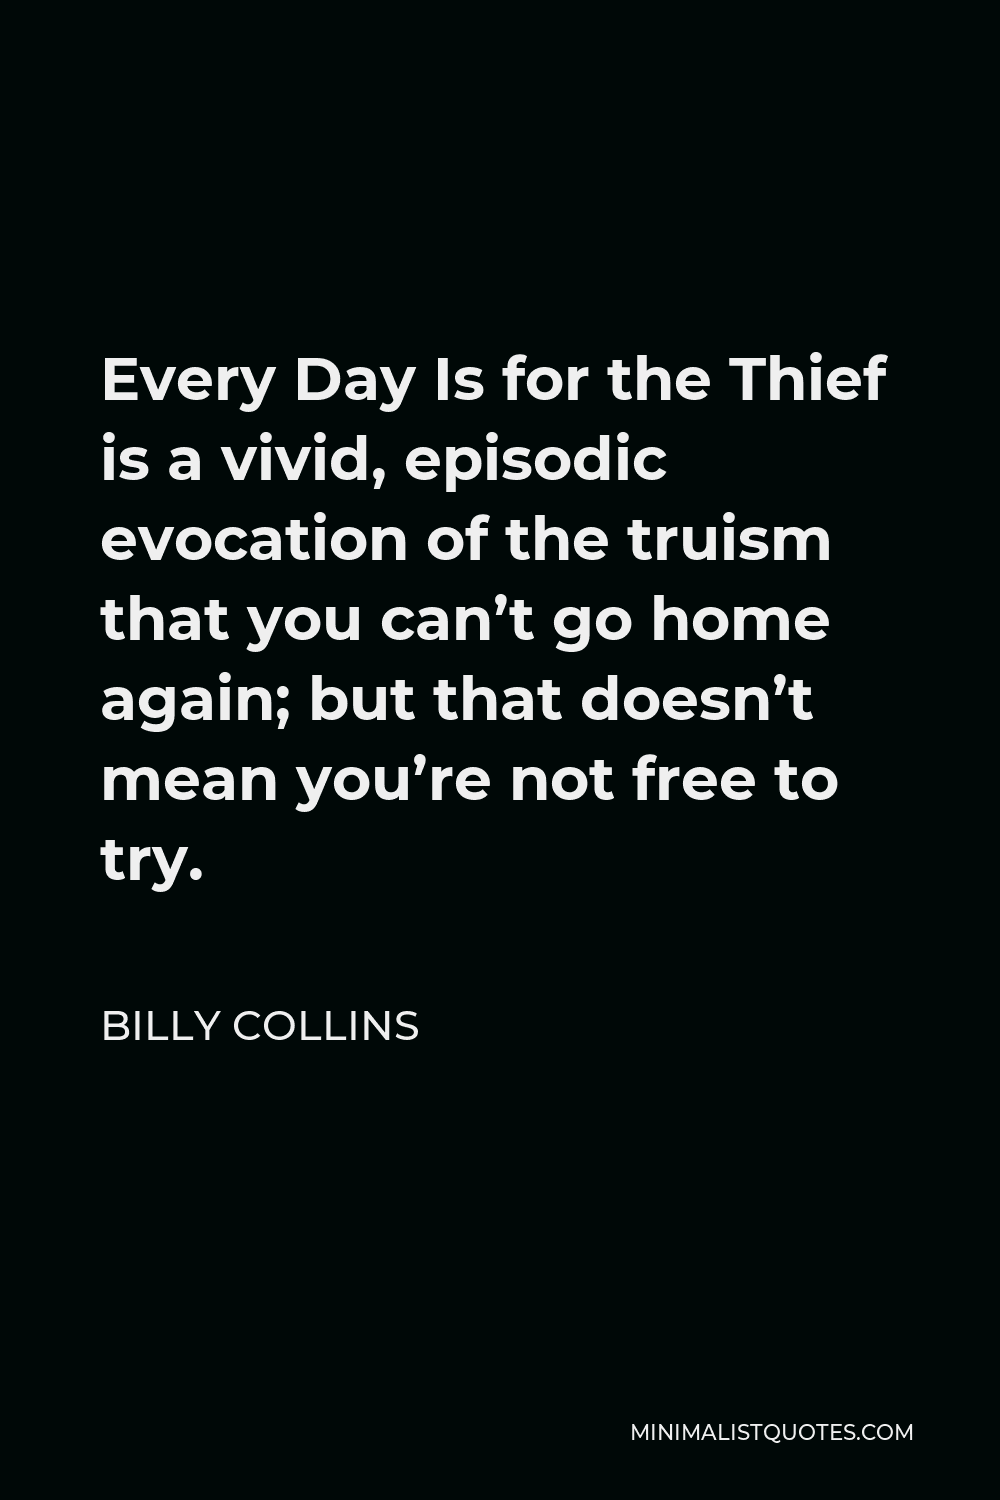 Billy Collins Quote - Every Day Is for the Thief is a vivid, episodic evocation of the truism that you can’t go home again; but that doesn’t mean you’re not free to try.